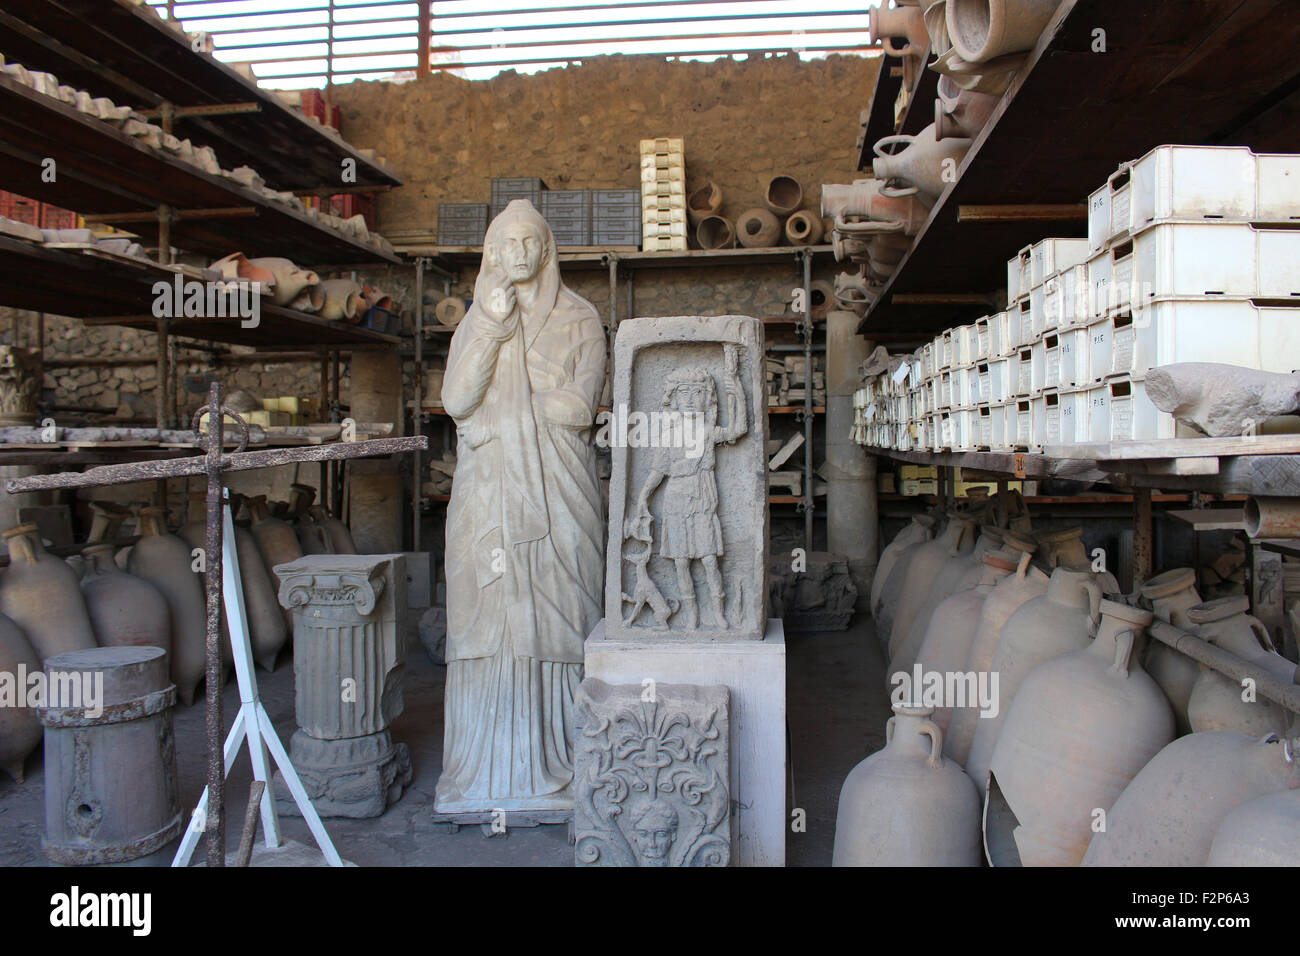 POMPEII, ITALY, JUNE 26, 2015: Ancient artifacts found in the ruins of the old city of Pompeii, Italy Stock Photo